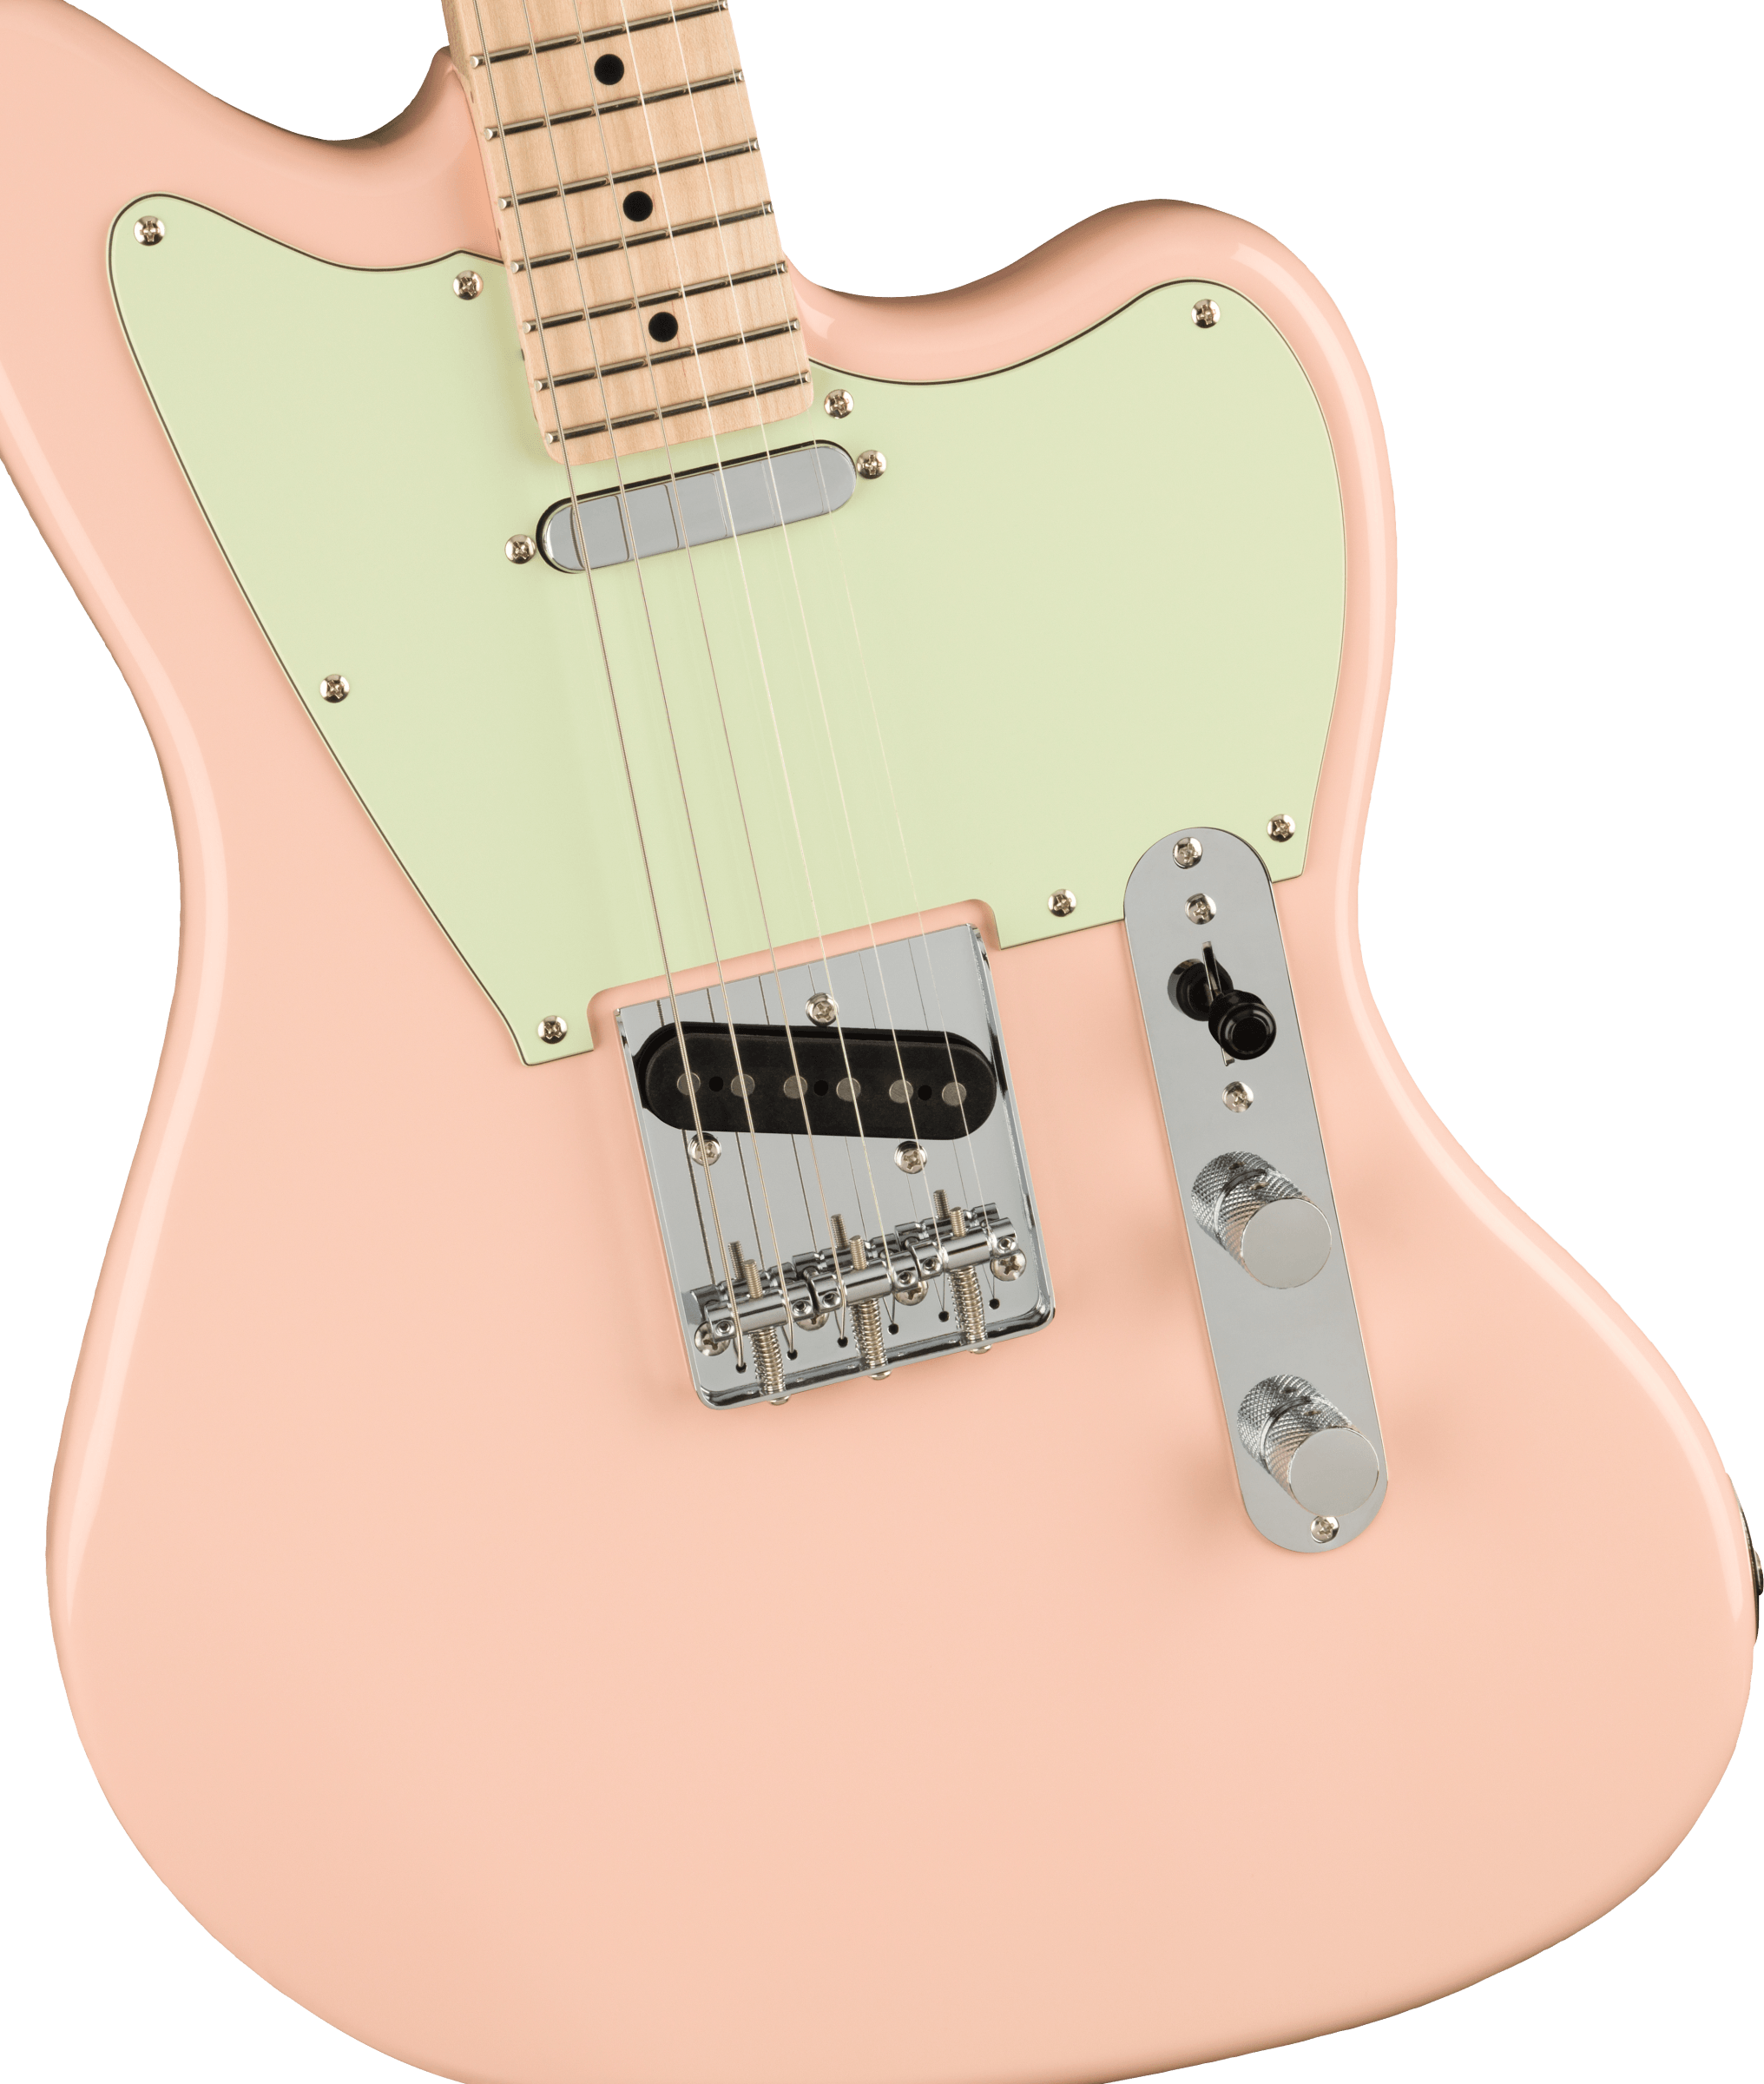 Squier Tele Offset Paranormal Ss Ht Mn - Shell Pink - Retro rock electric guitar - Variation 2